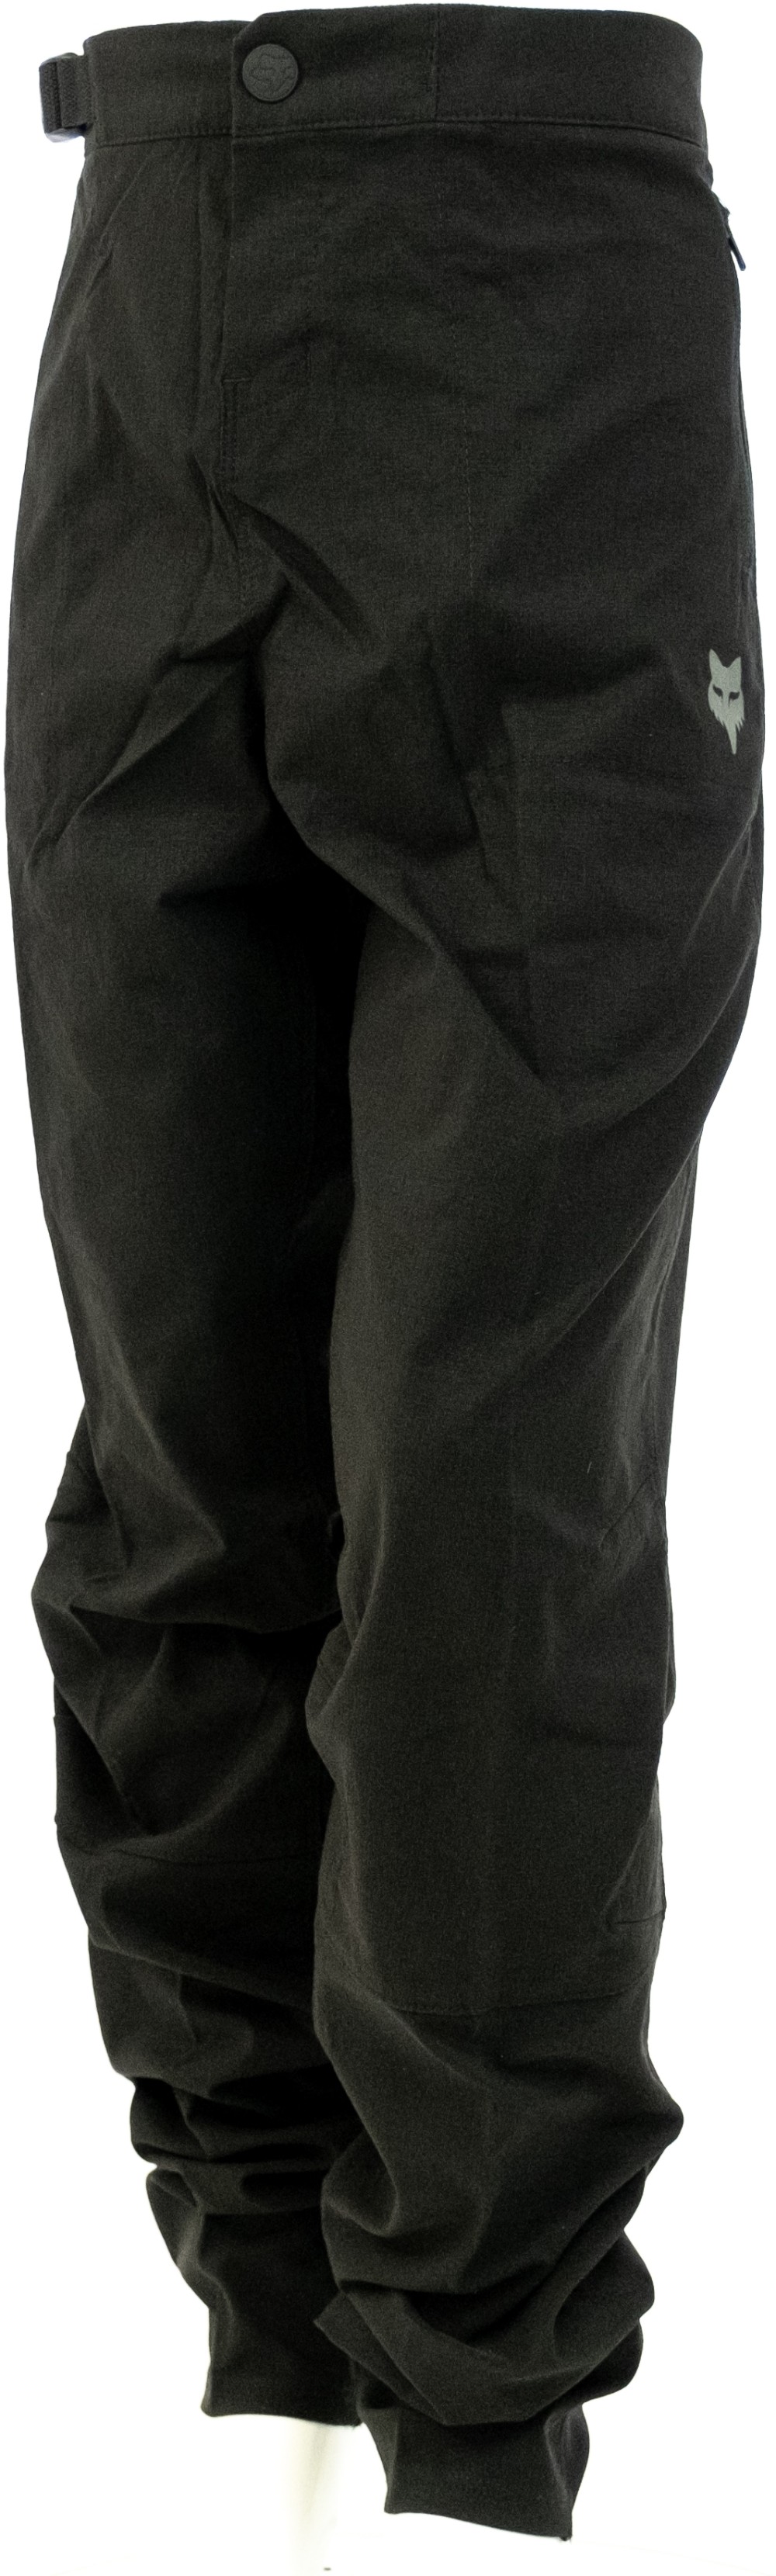 Ranger Youth MTB Trousers image 0